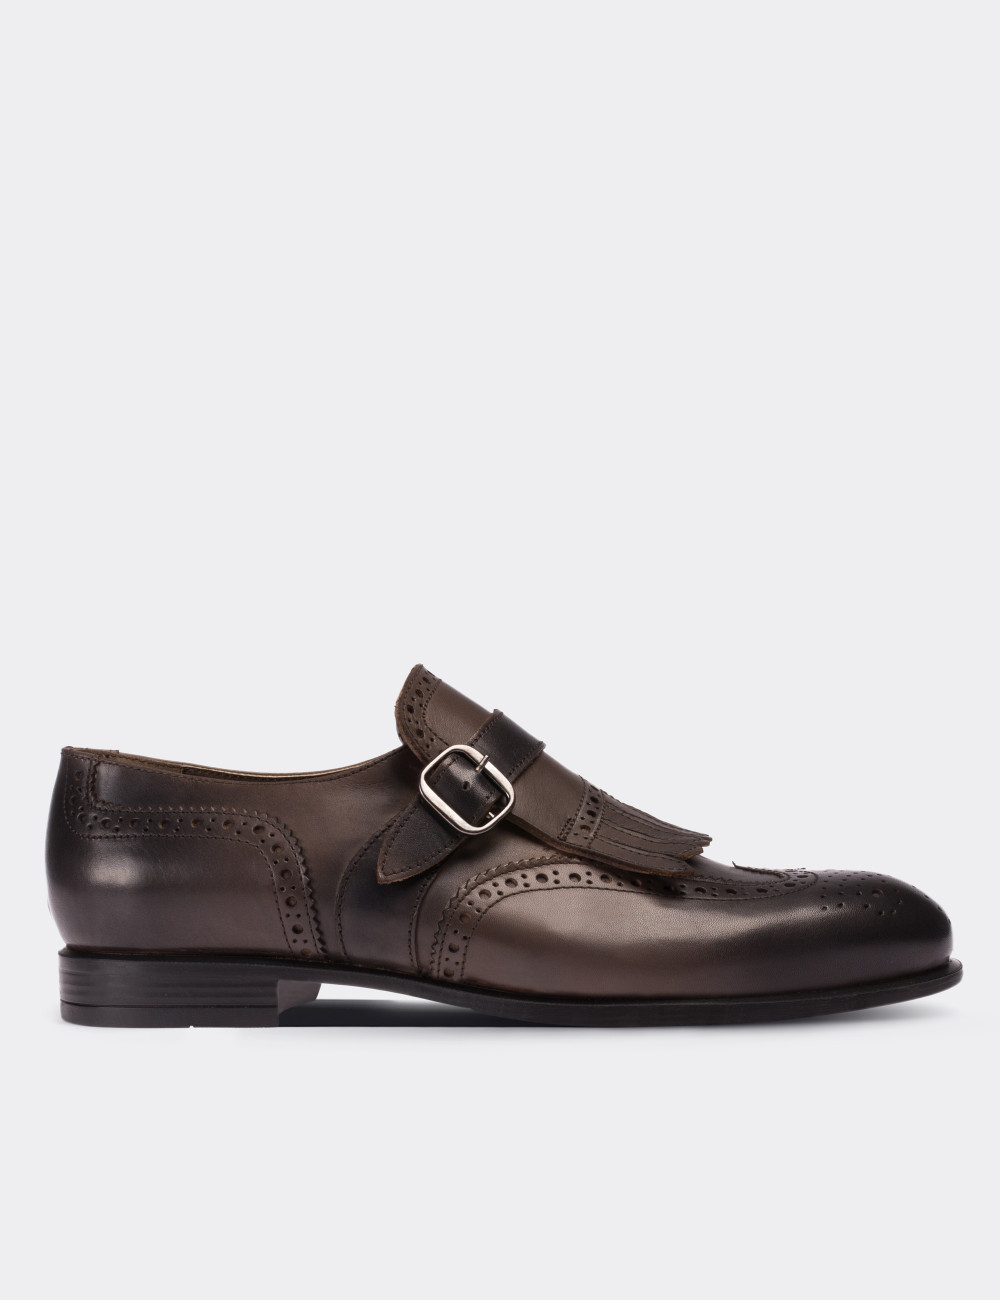 Sandstone  Leather Classic Shoes - 01680MVZNC01